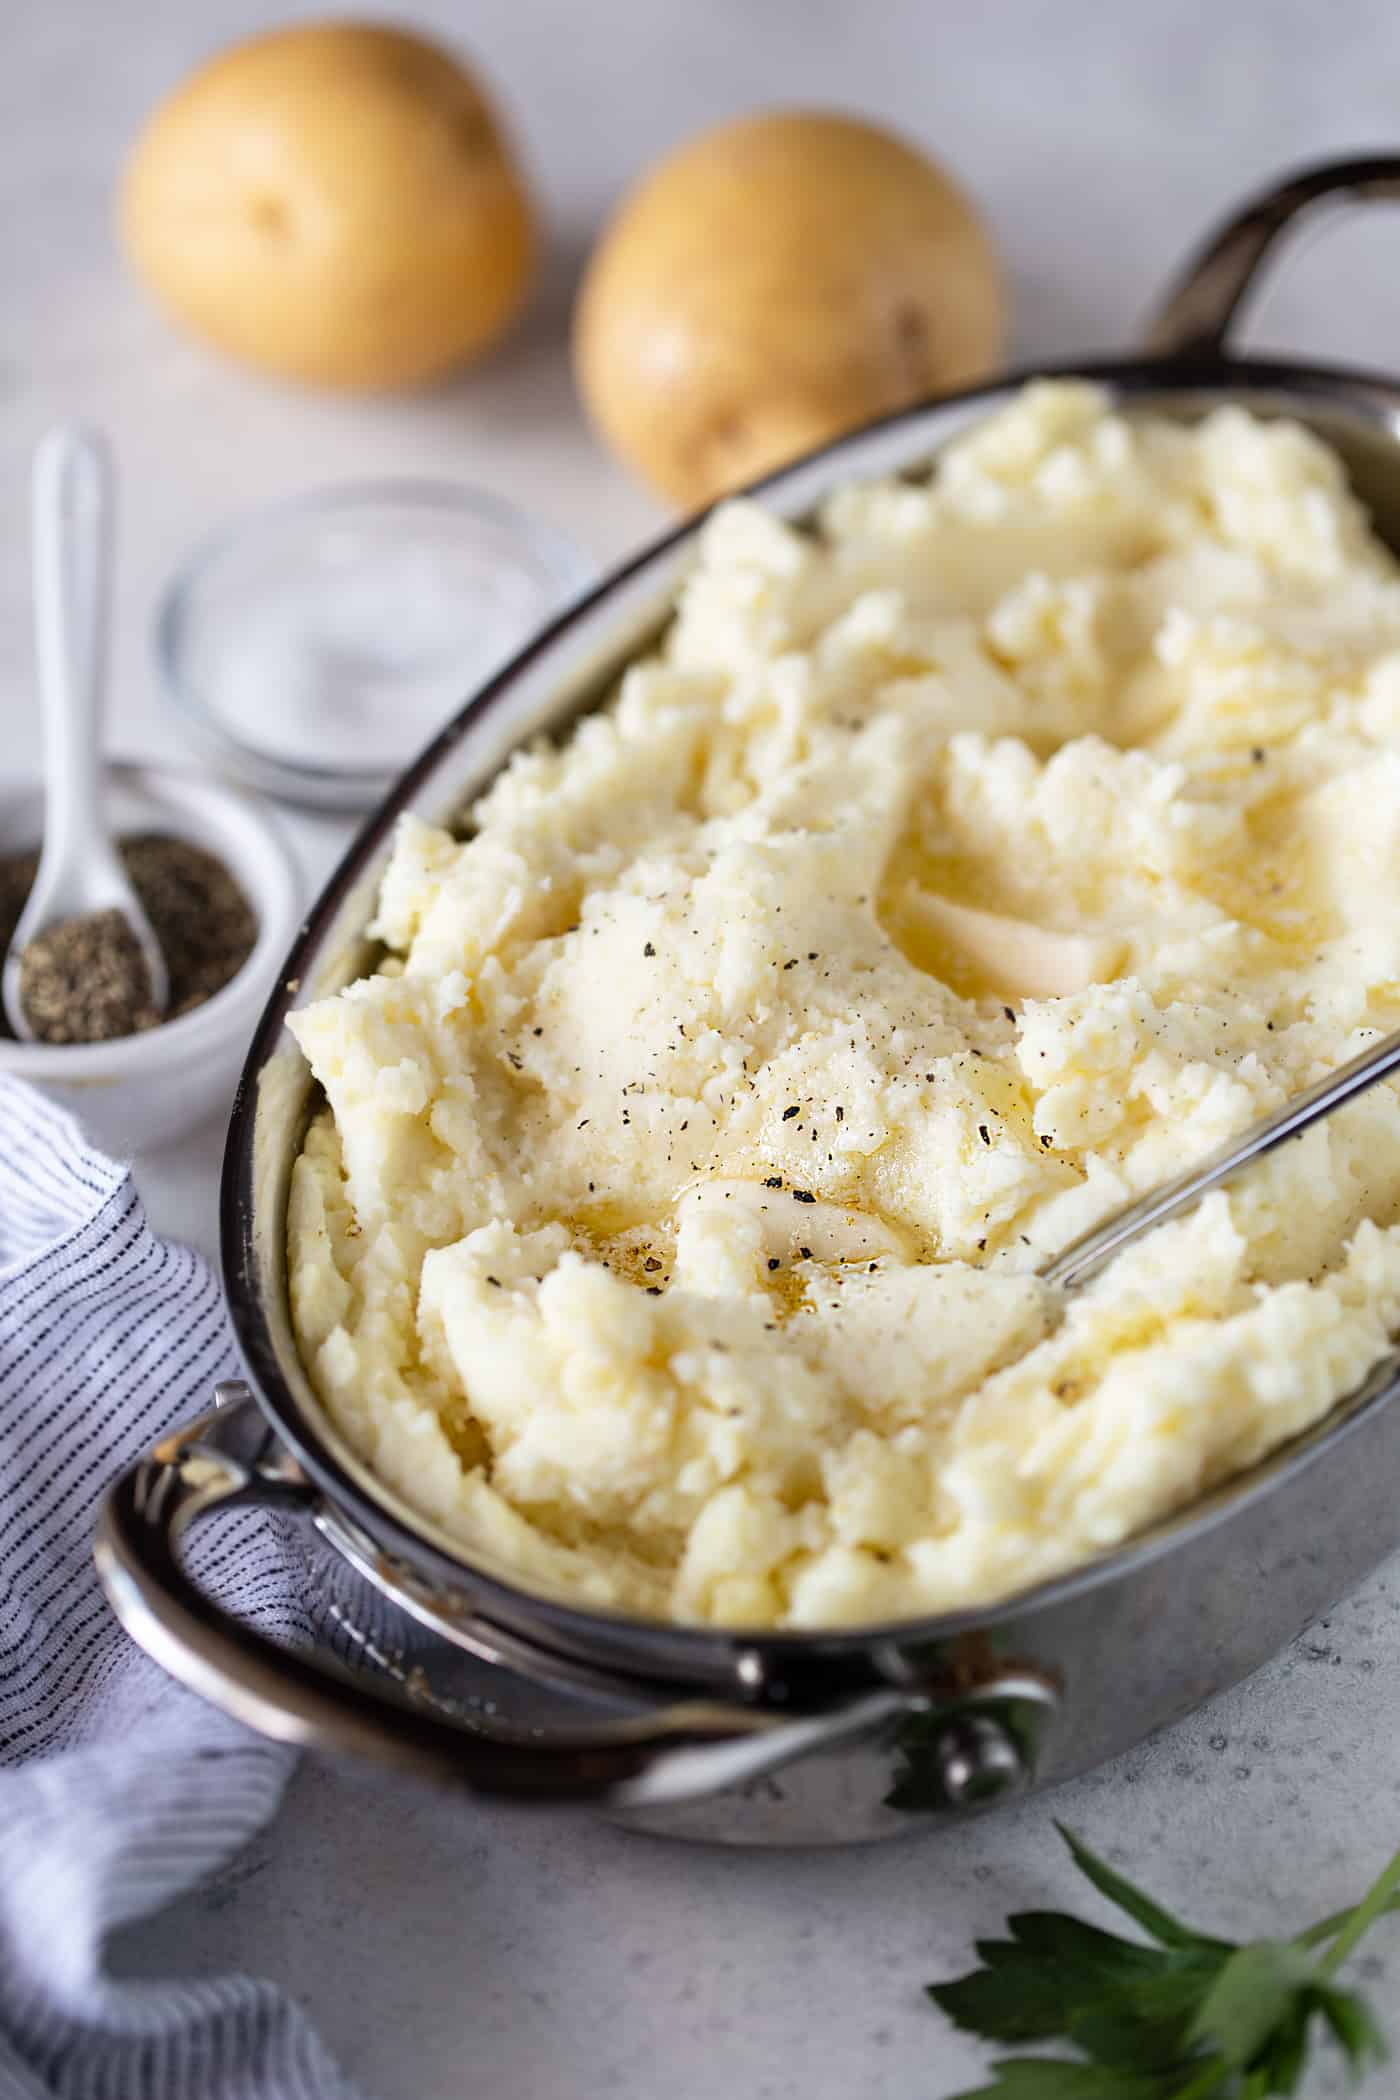 Mashed potatoes in a silver baking dish garnished with freshly ground pepper and melted butter.